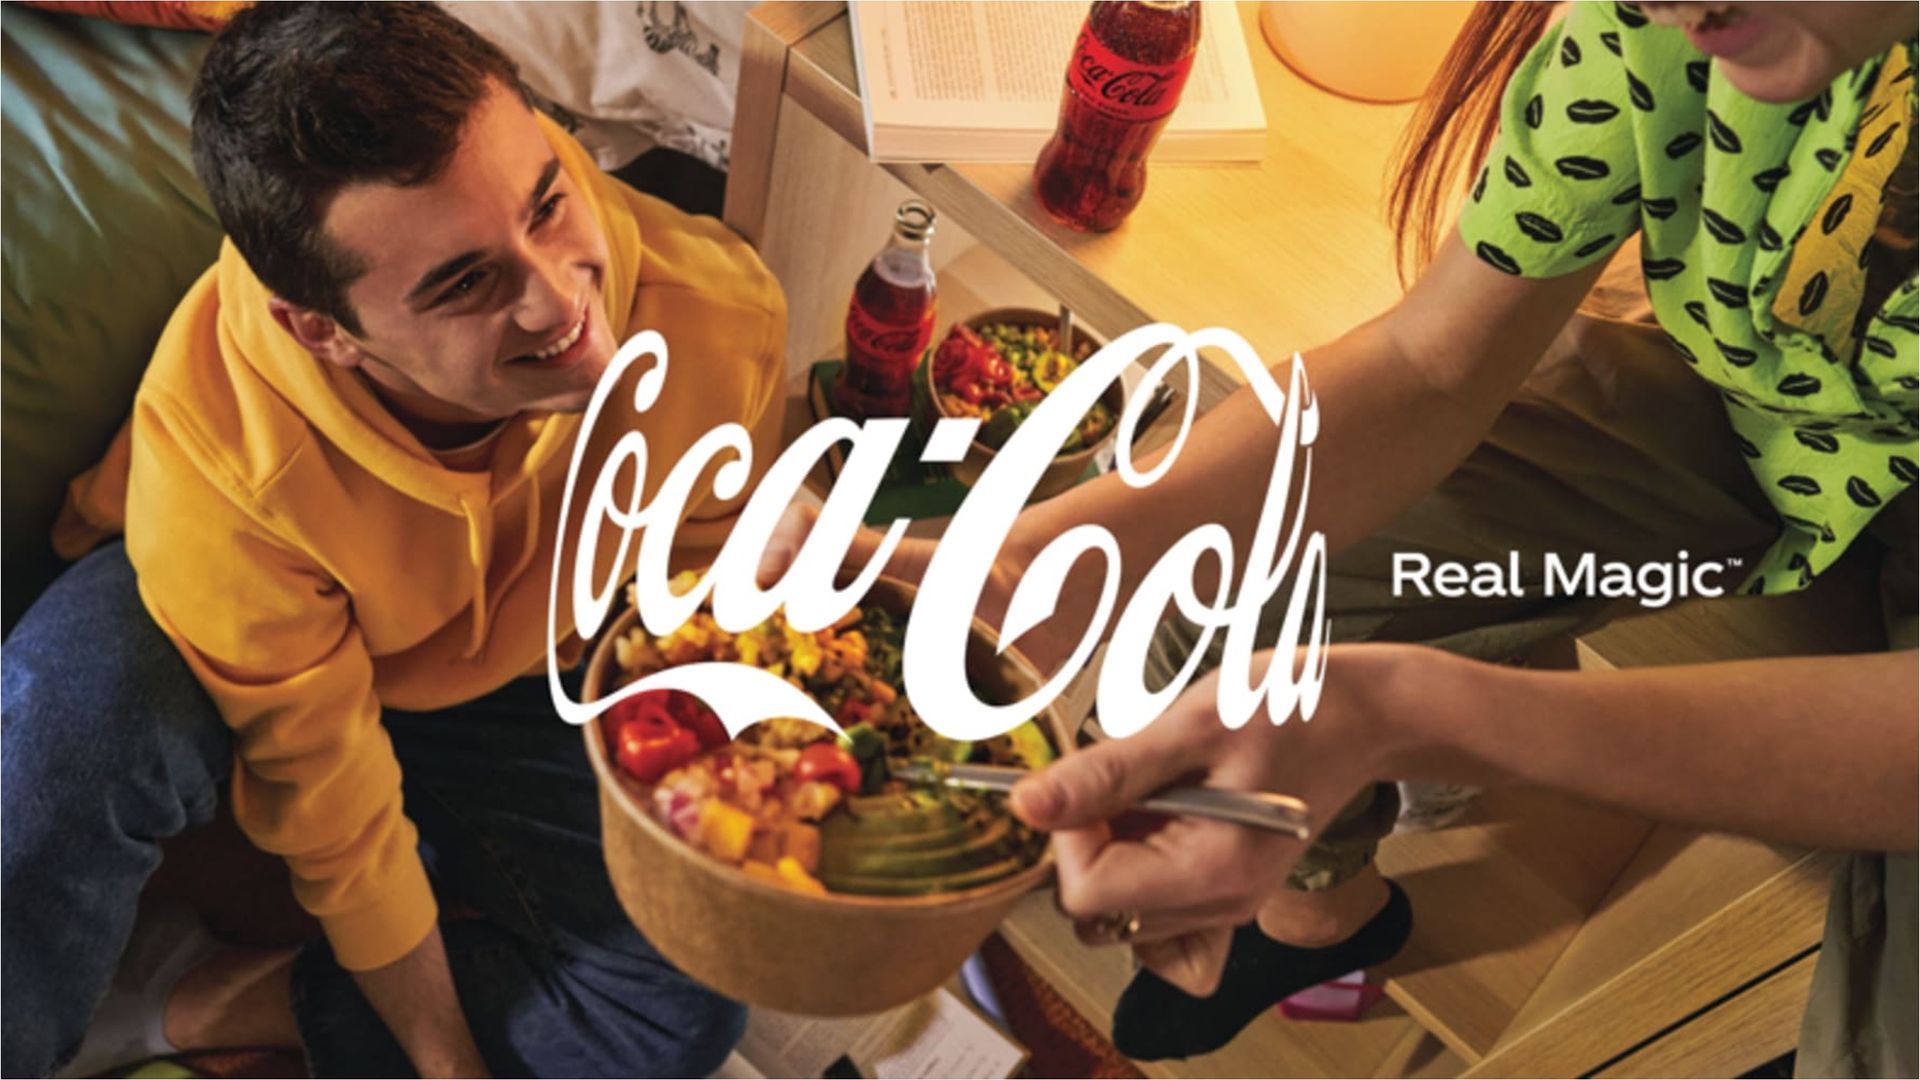 Coca-Cola_logo-Real_magic_Once-again-named-star-brand-of-the-year_Cola-Zero.com